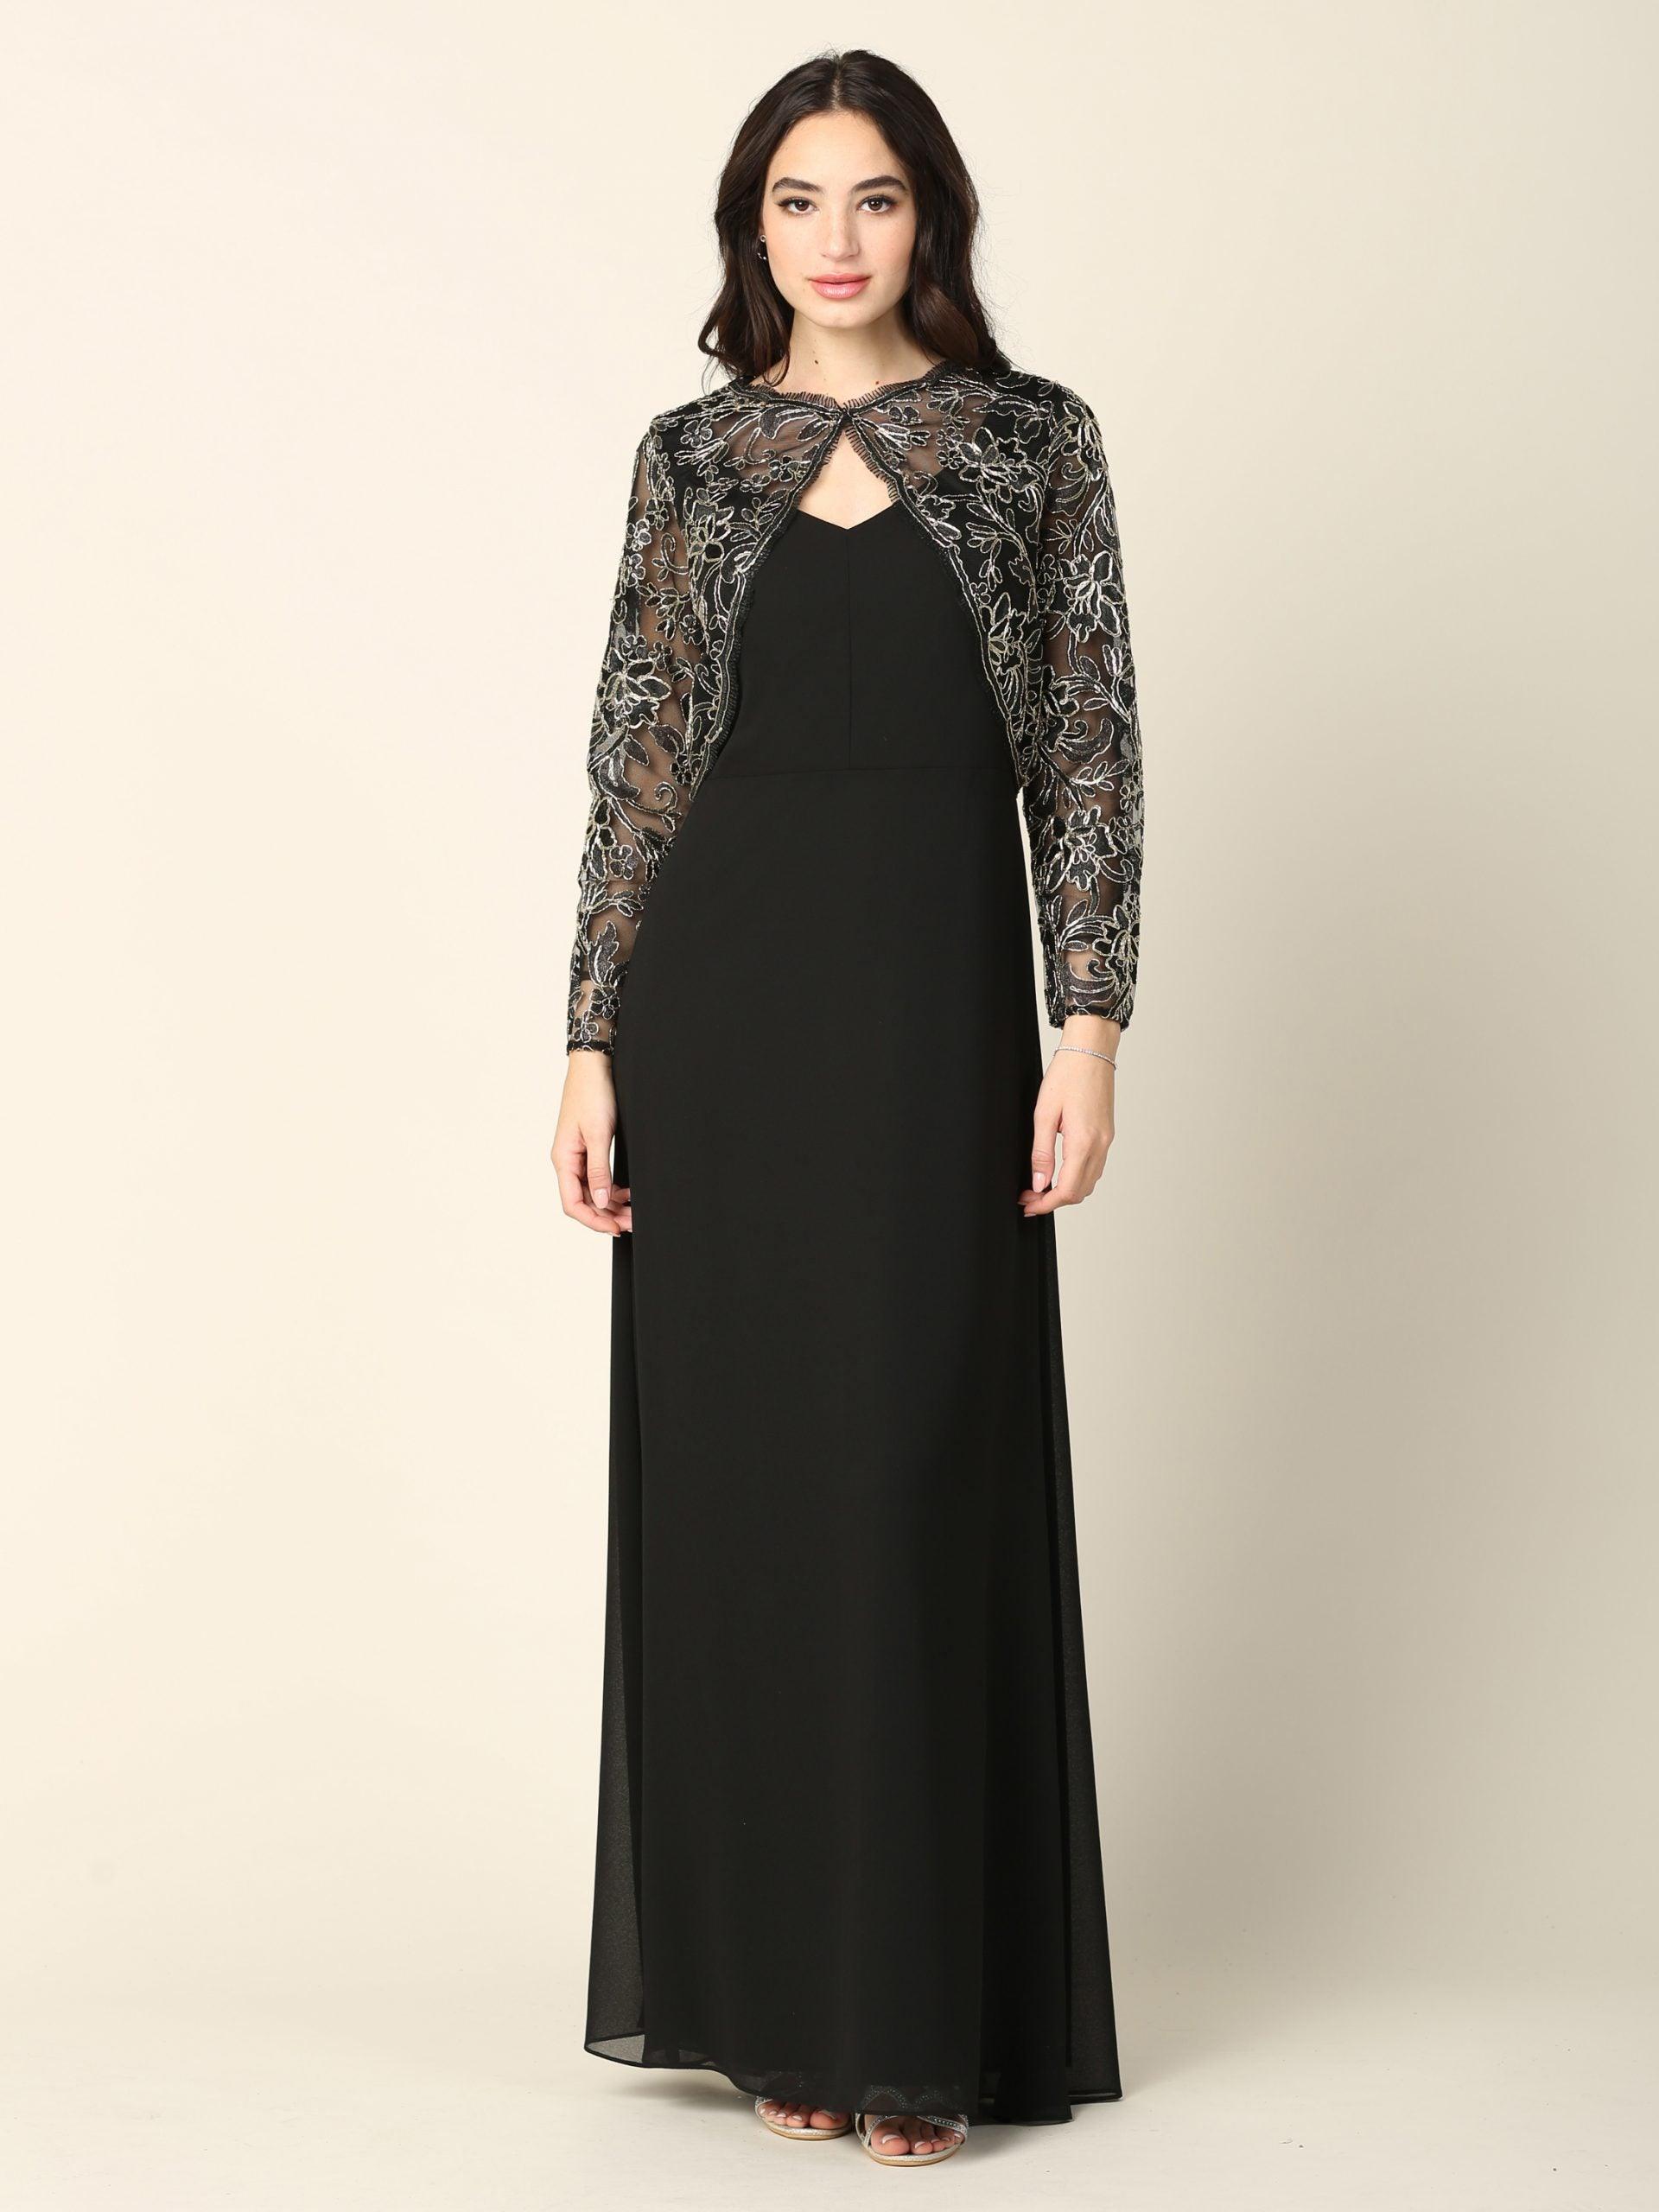 Elegant Dark Navy Lace Mother Gown with Half Sleeve Jacket - VQ